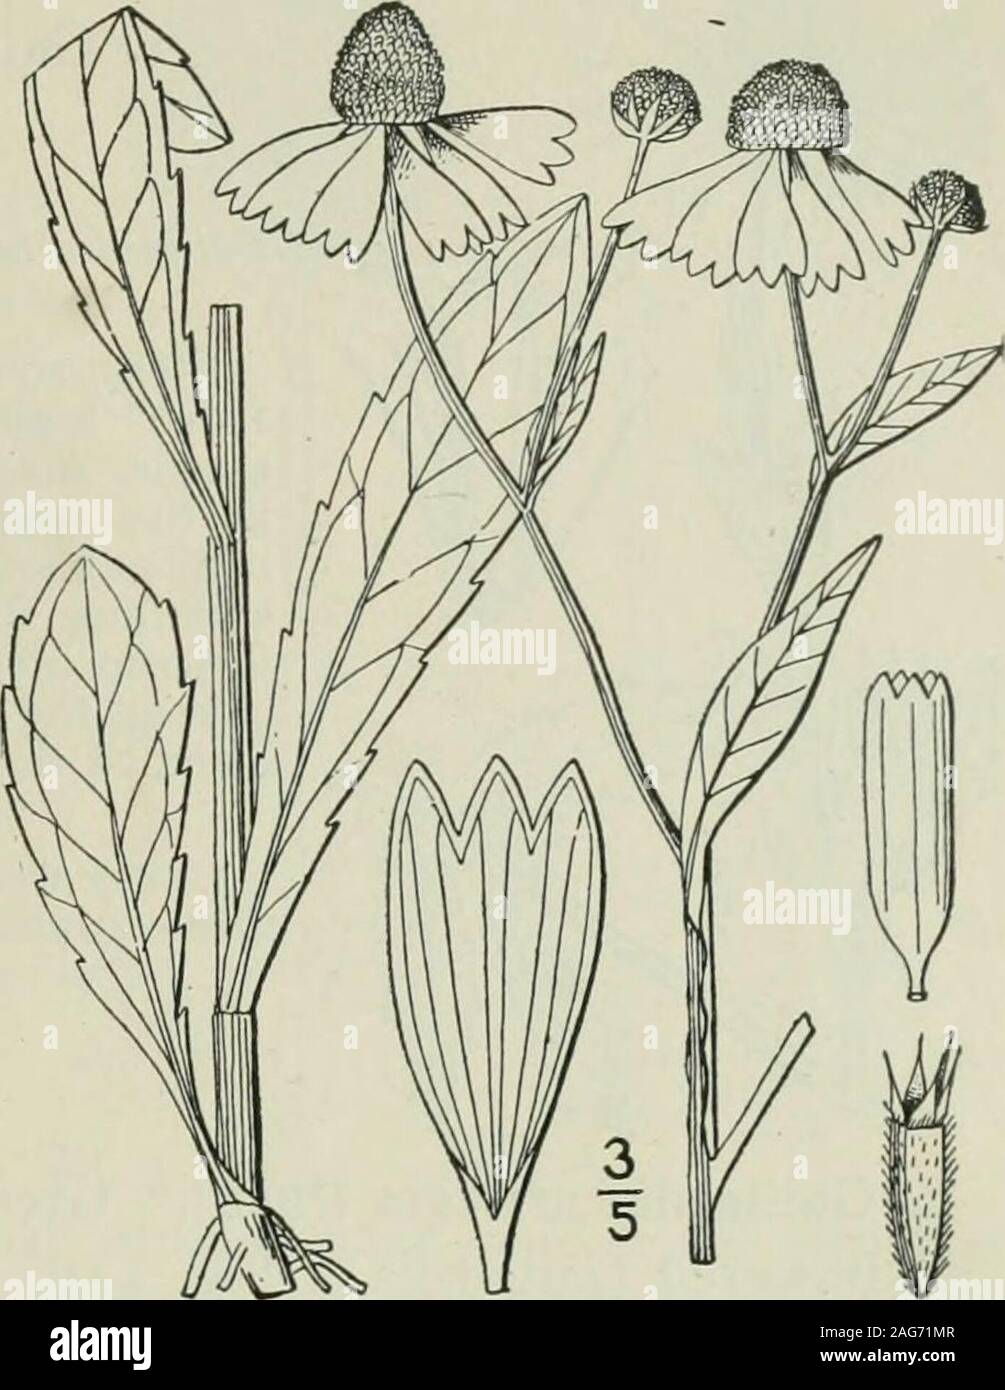 . An illustrated flora of the northern United States, Canada and the British possessions : from Newfoundland to the parallel of the southern boundary of Virginia and from the Atlantic Ocean westward to the 102nd meridian. 3. Helenium tenuifolium Xutt. Fine-leaved Sneezeweed. Fig. 4544. H. tenuifolium Nutt. Journ. Phil. Acad. 7: 66. 1S34. Annual; glabrous or minutely pubescent above;stem slender, very leafy and usually muchbranched, 8-24 high. Leaves all linear-filiform,entire, sessile, often fascicled, ¥-i¥ long, h orless wide; heads several or numerous, corym-bose, 9-i5 broad, borne on slende Stock Photo